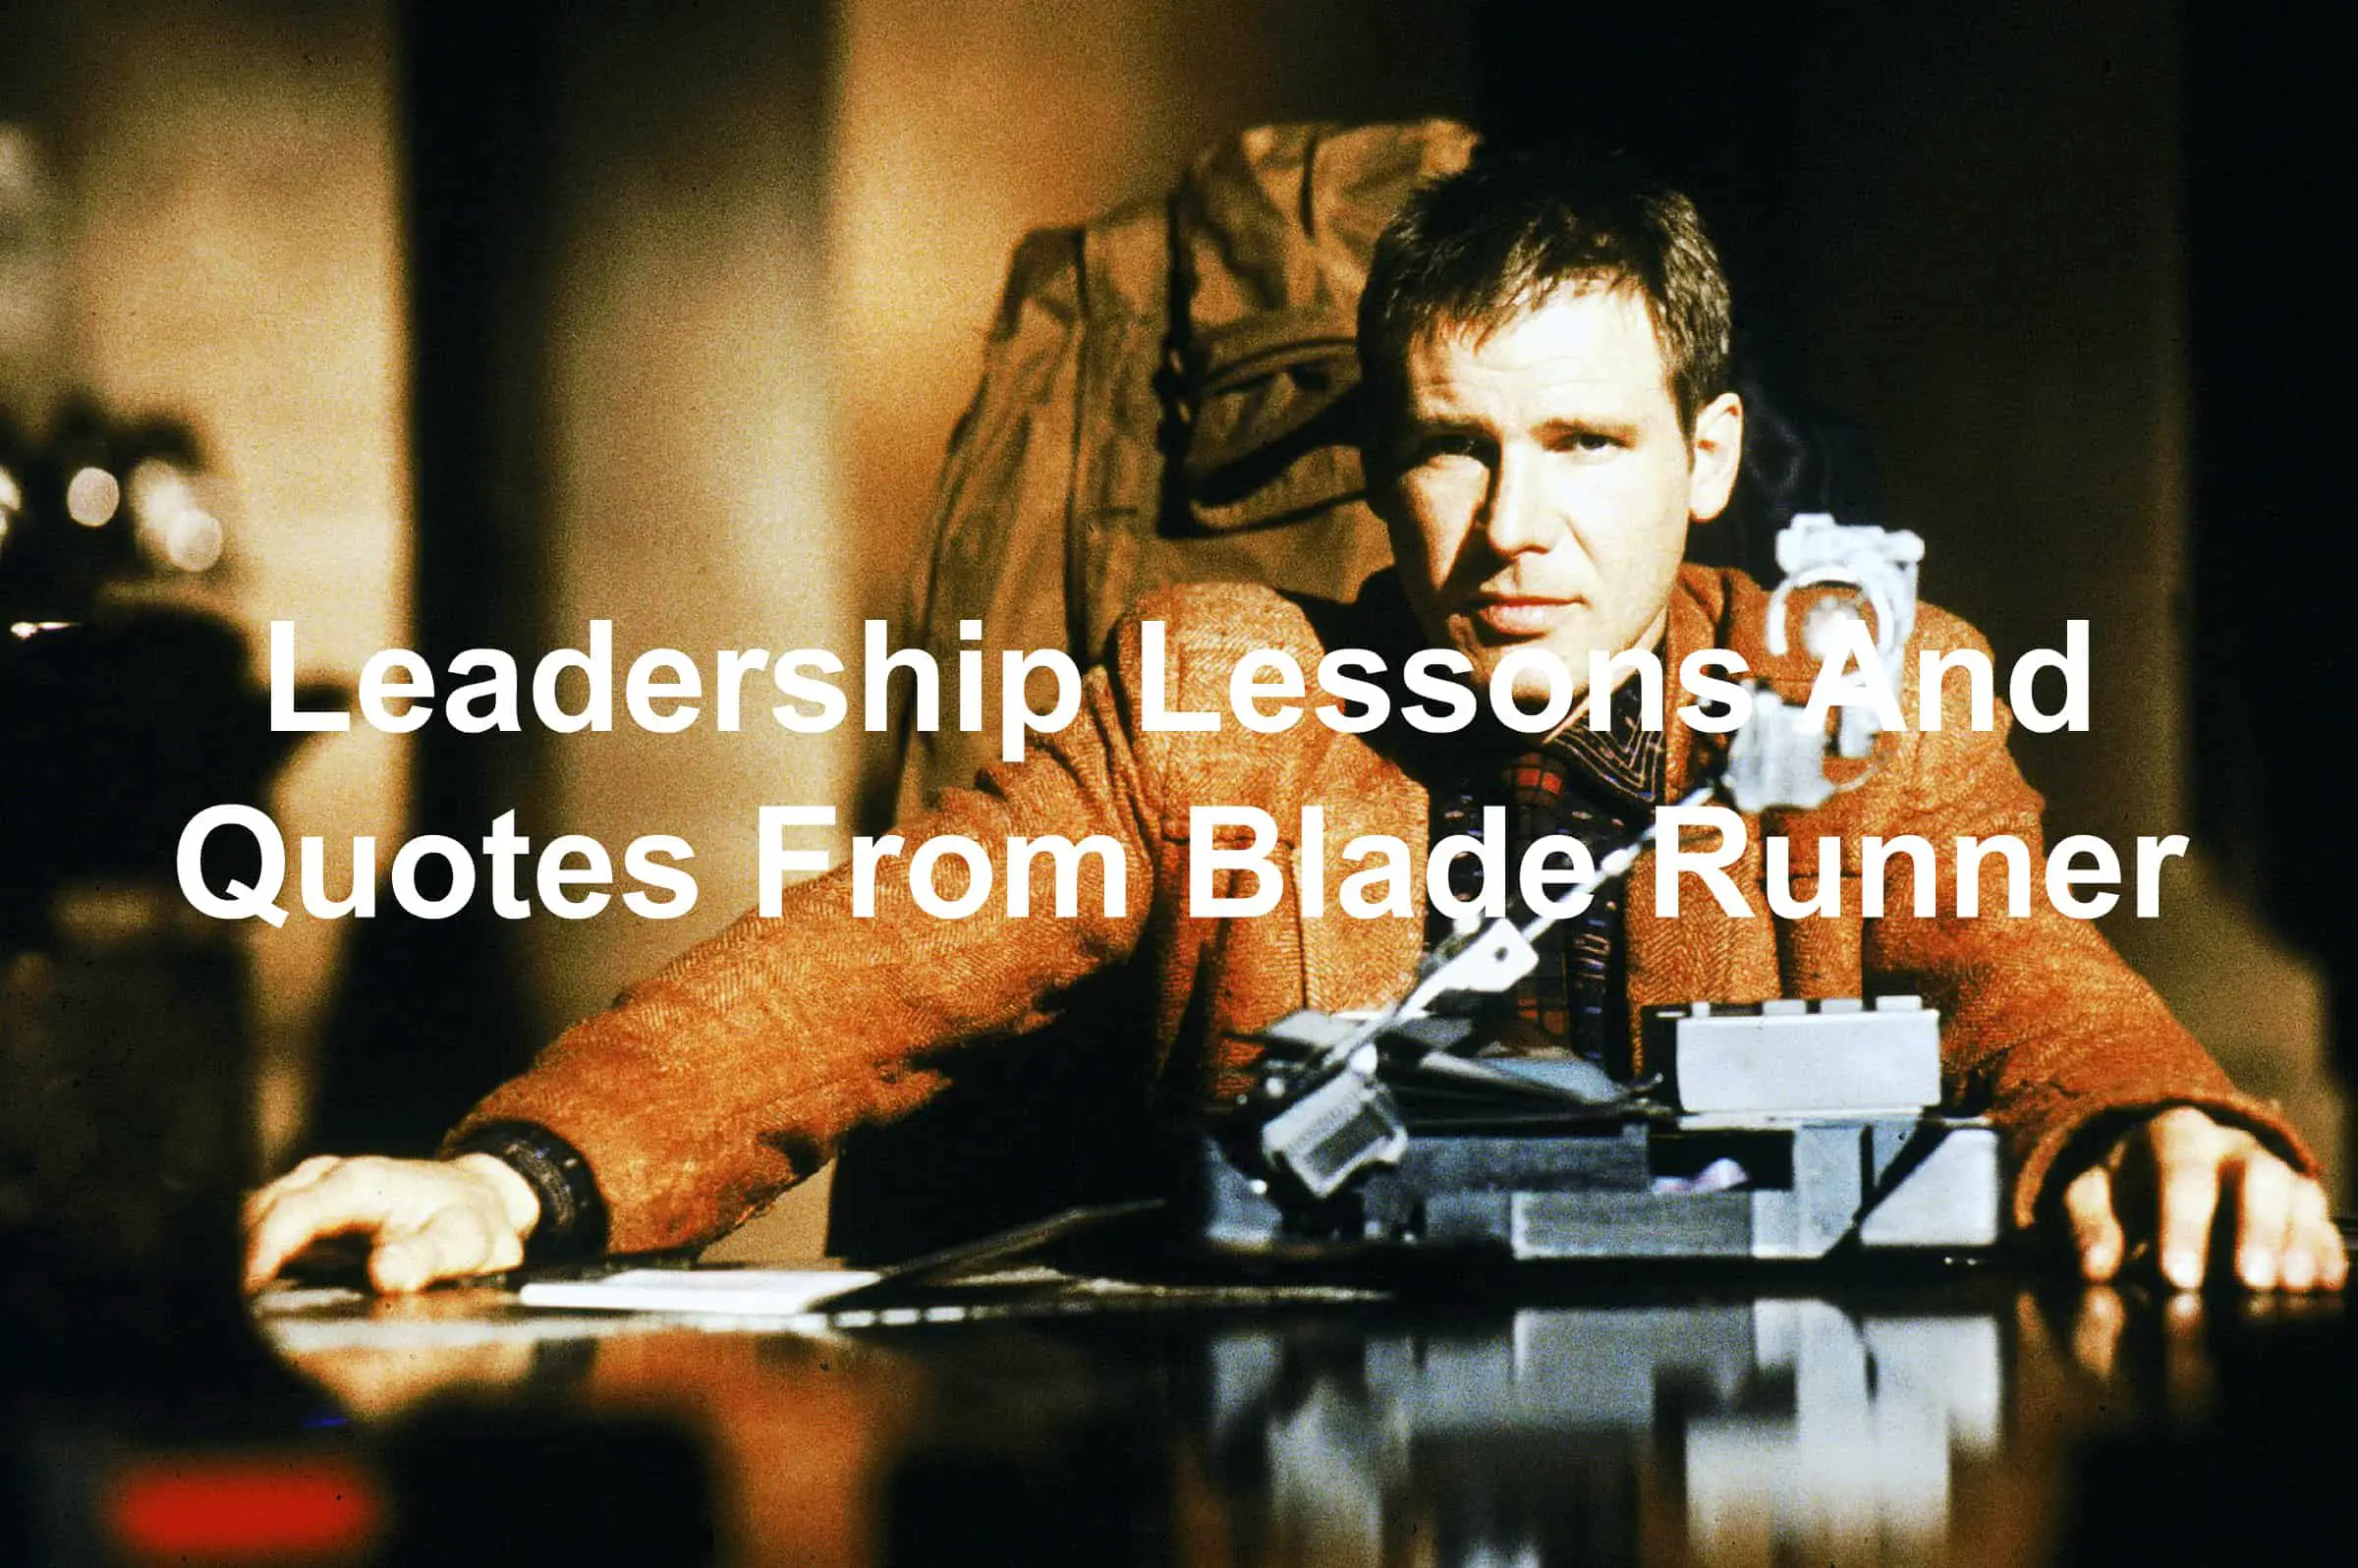 Quotes from bladerunner